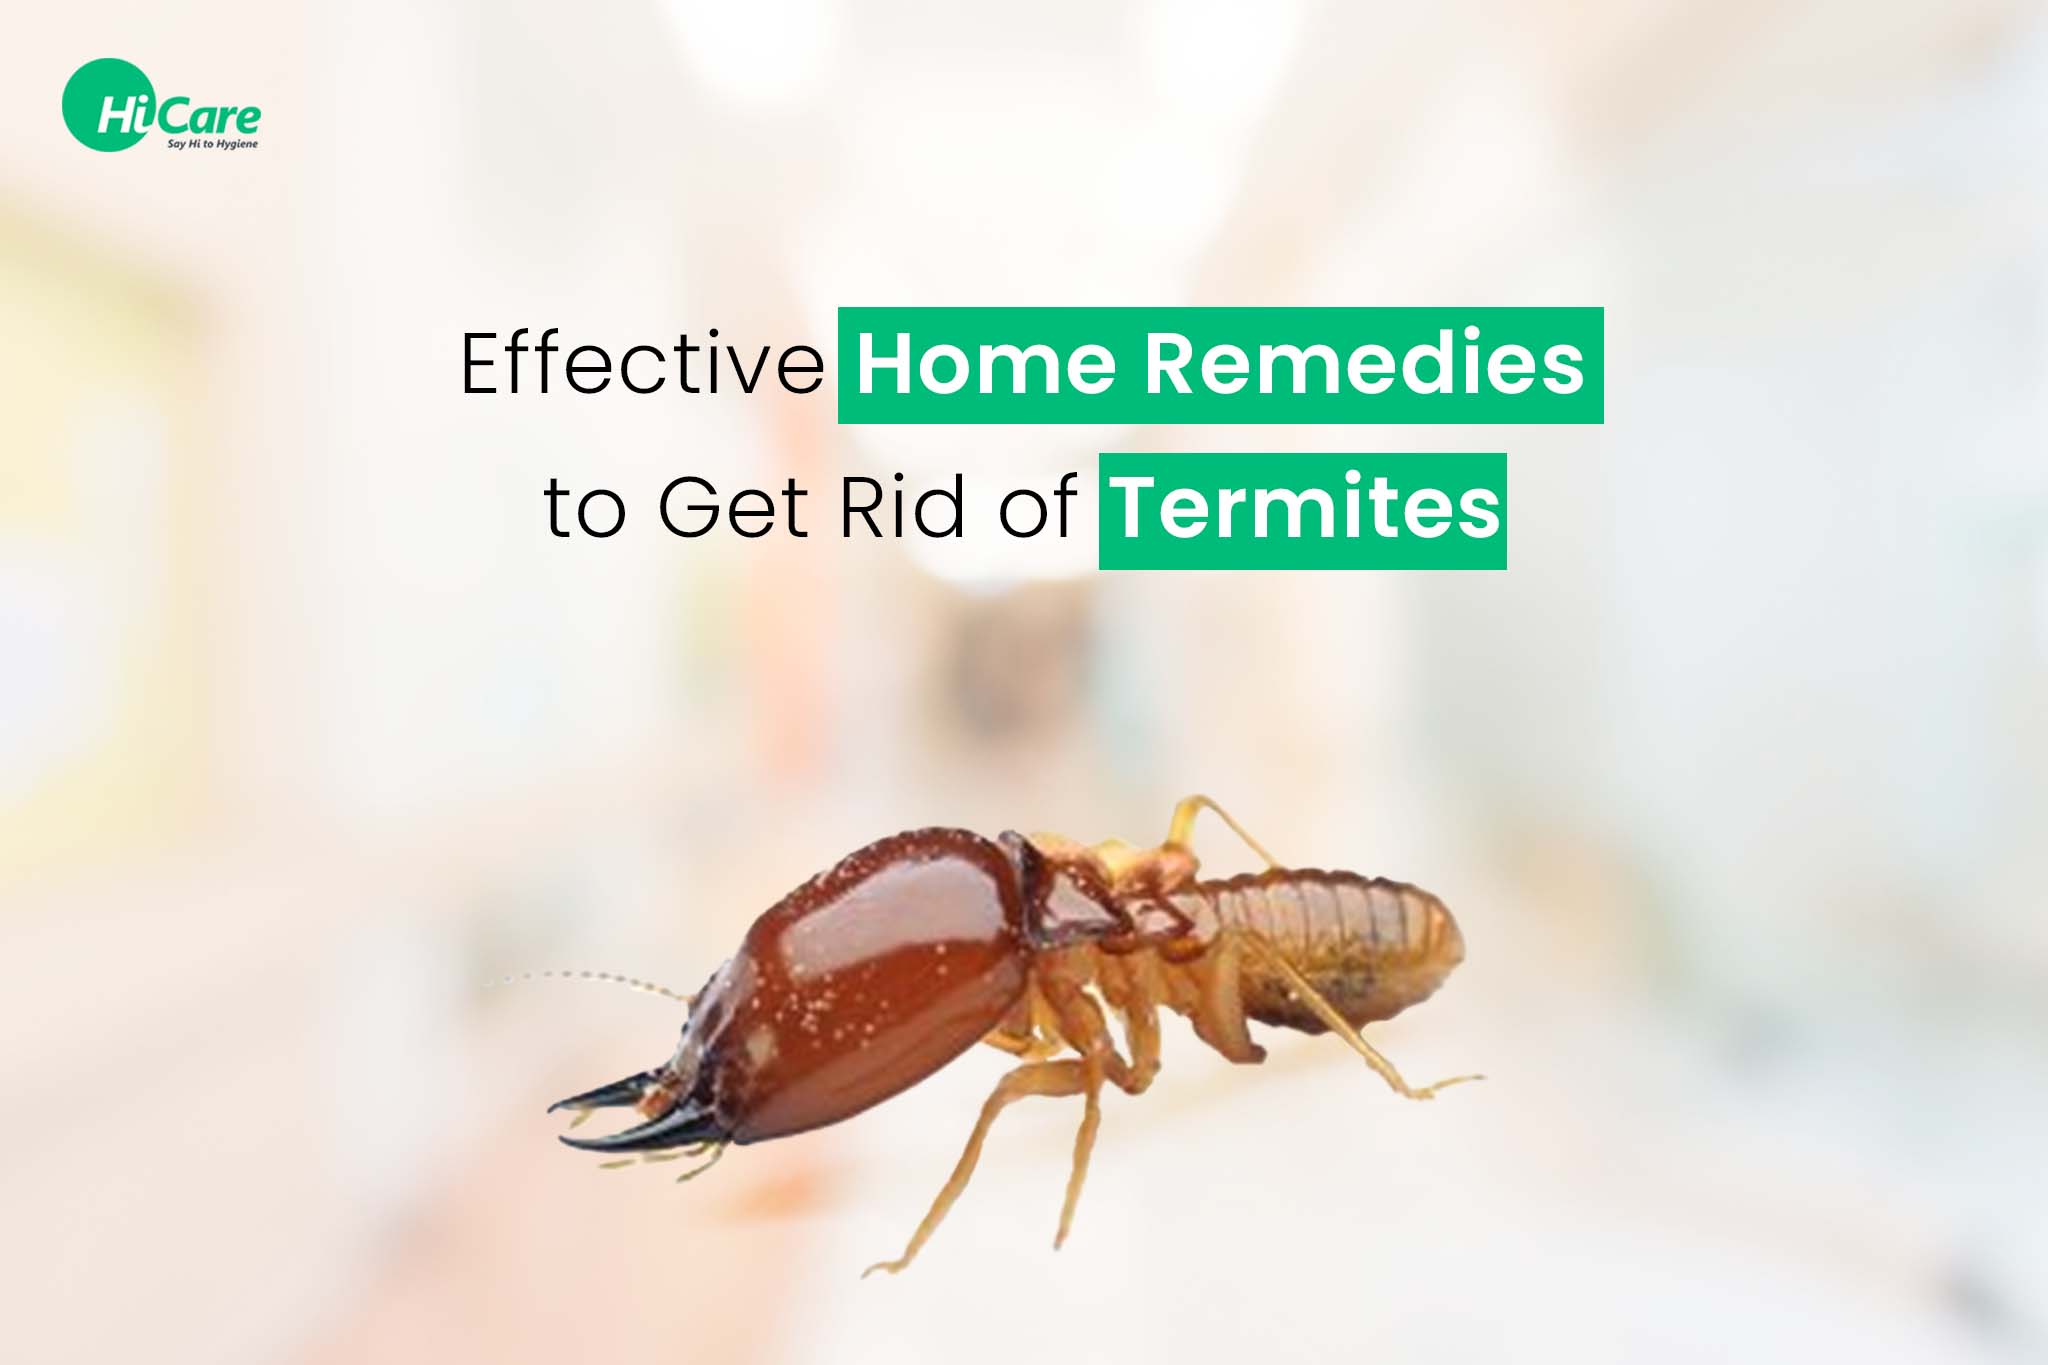 https://hicare.in/blog/wp-content/uploads/2023/02/effective-home-remedies-to-get-of-rid-of-termites.jpg